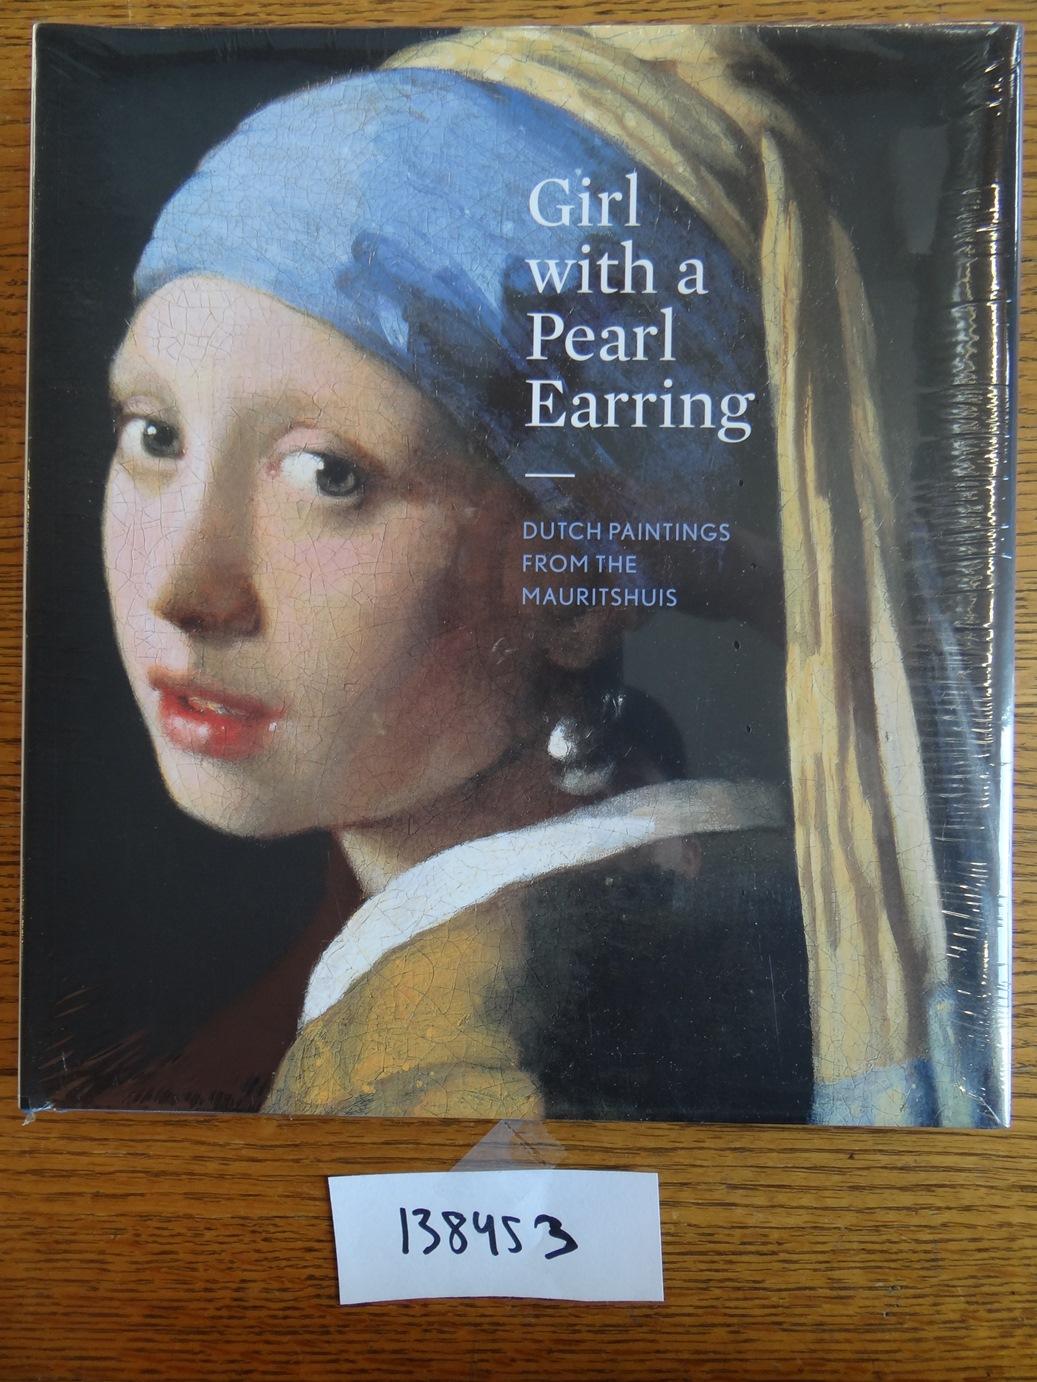 Girl with a Pearl Earring: Dutch Paintings from the Mauritshuis - van der Vinde, Lea (ed.)